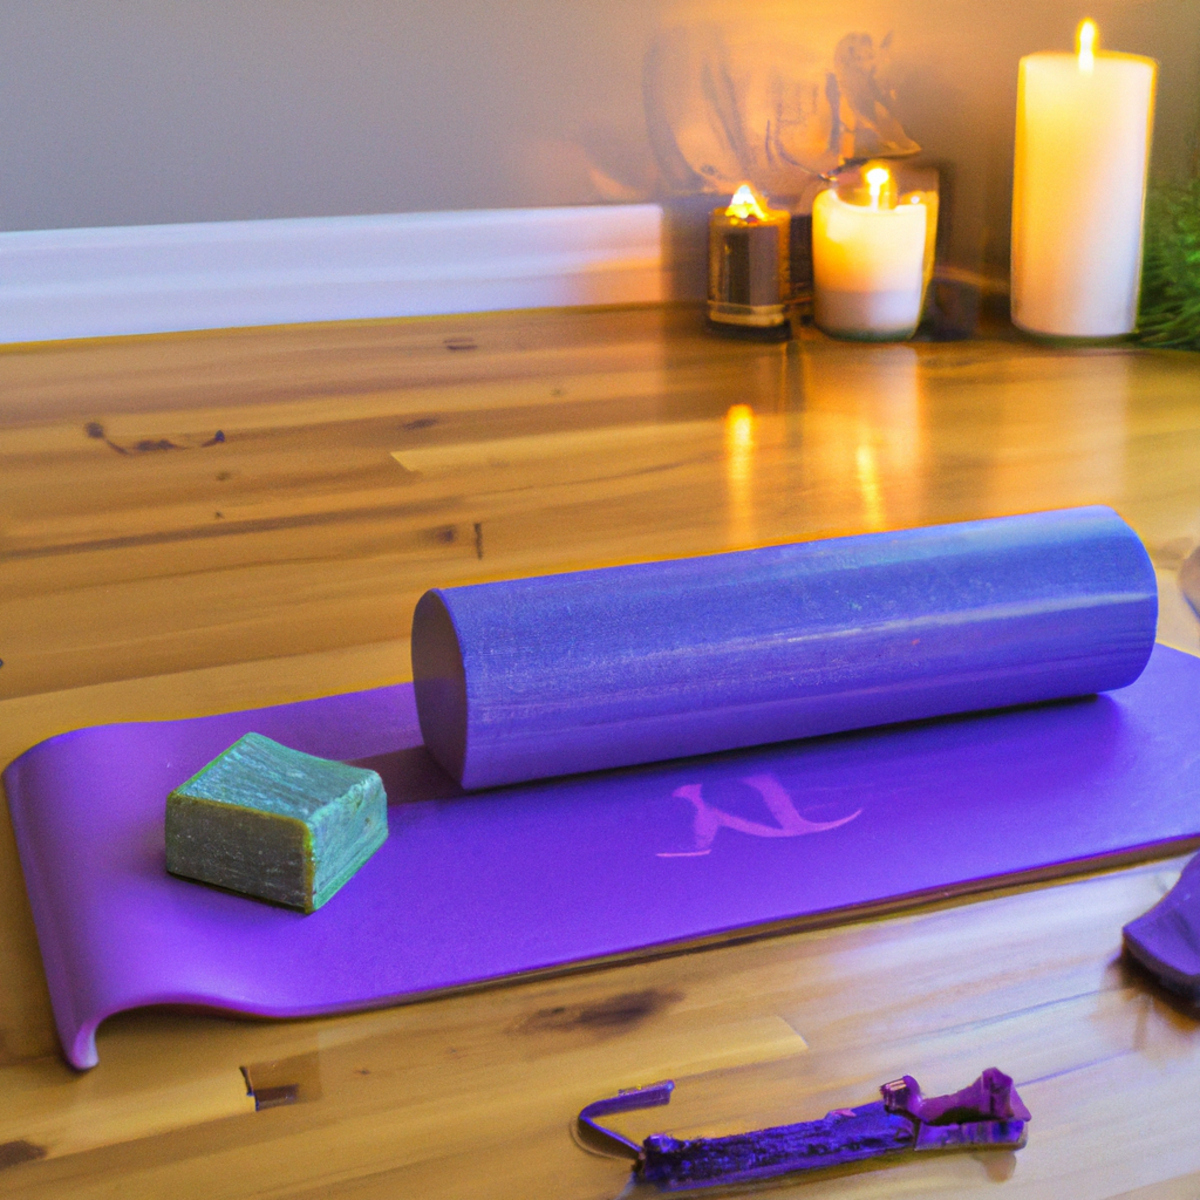 A calming yoga scene with props including a mat, bolster, block, candle, straps, and foam roller.